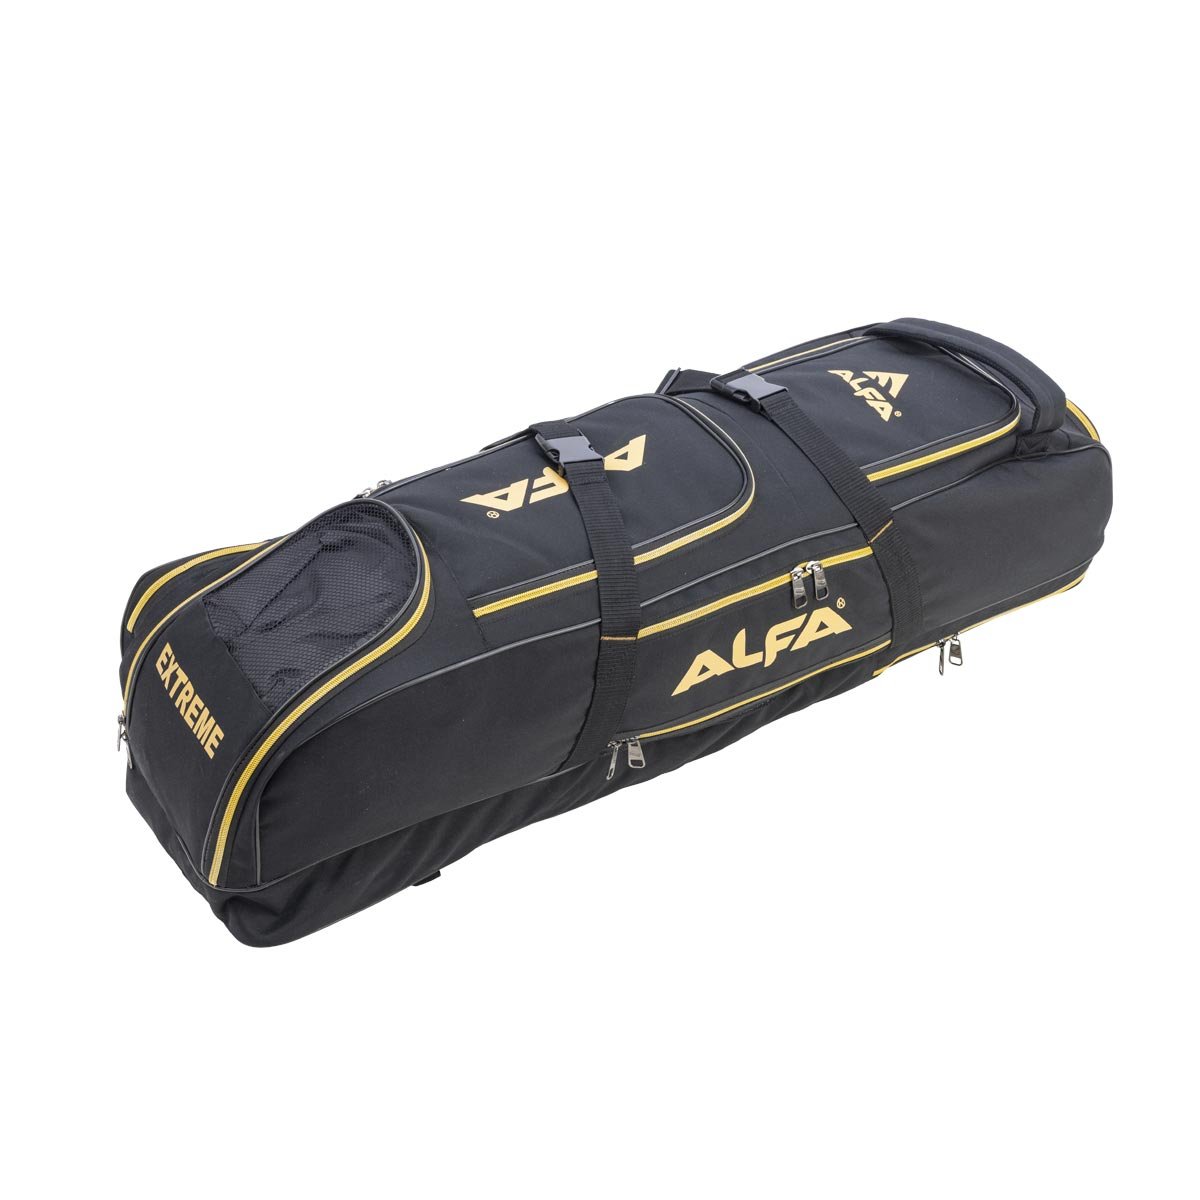 Promark Transport Deluxe Stick Bag TDSB - 2112 PERCUSSION